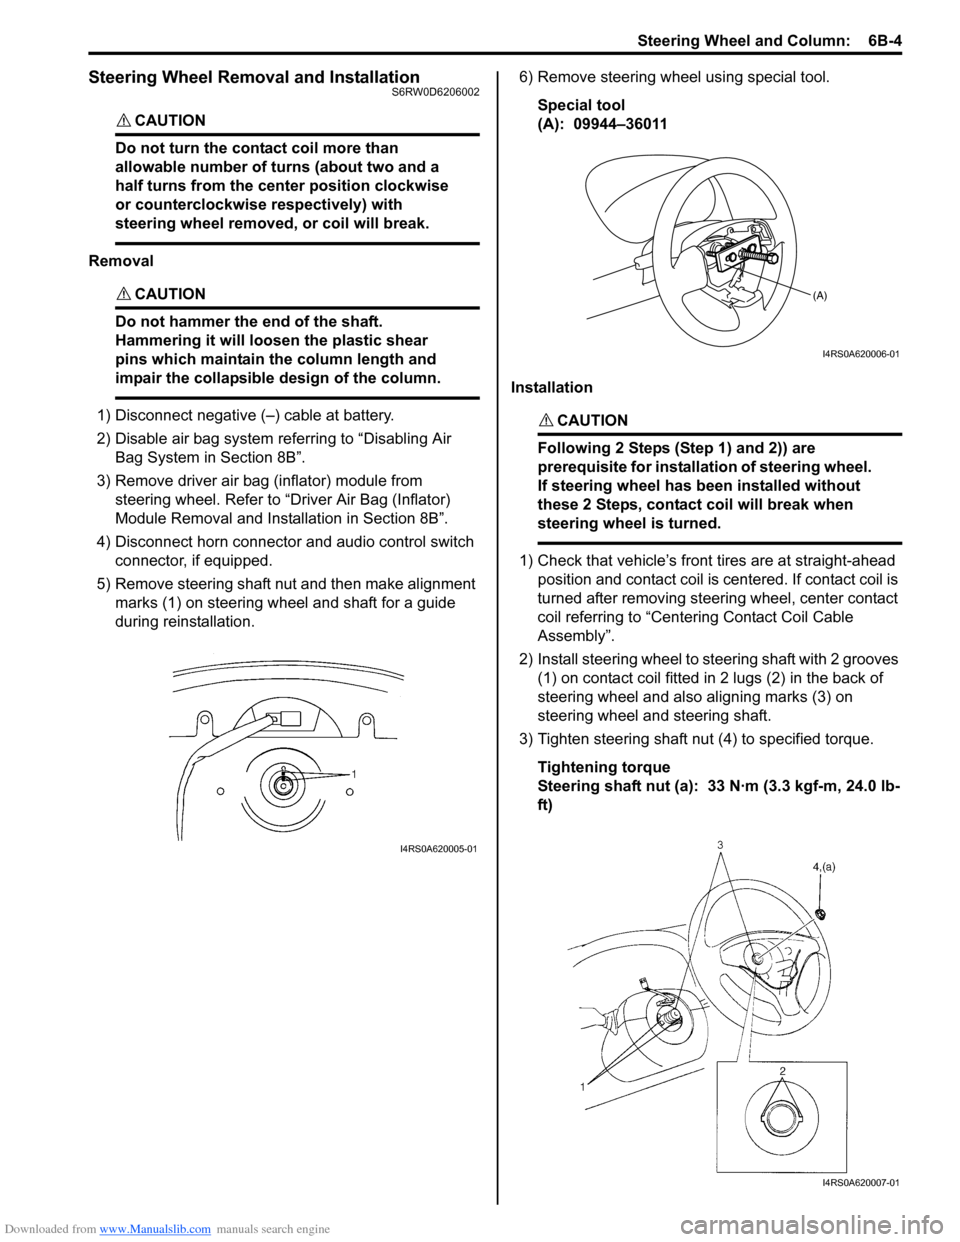 SUZUKI SX4 2006 1.G Service Workshop Manual Downloaded from www.Manualslib.com manuals search engine Steering Wheel and Column:  6B-4
Steering Wheel Removal and InstallationS6RW0D6206002
CAUTION! 
Do not turn the contact coil more than 
allowab